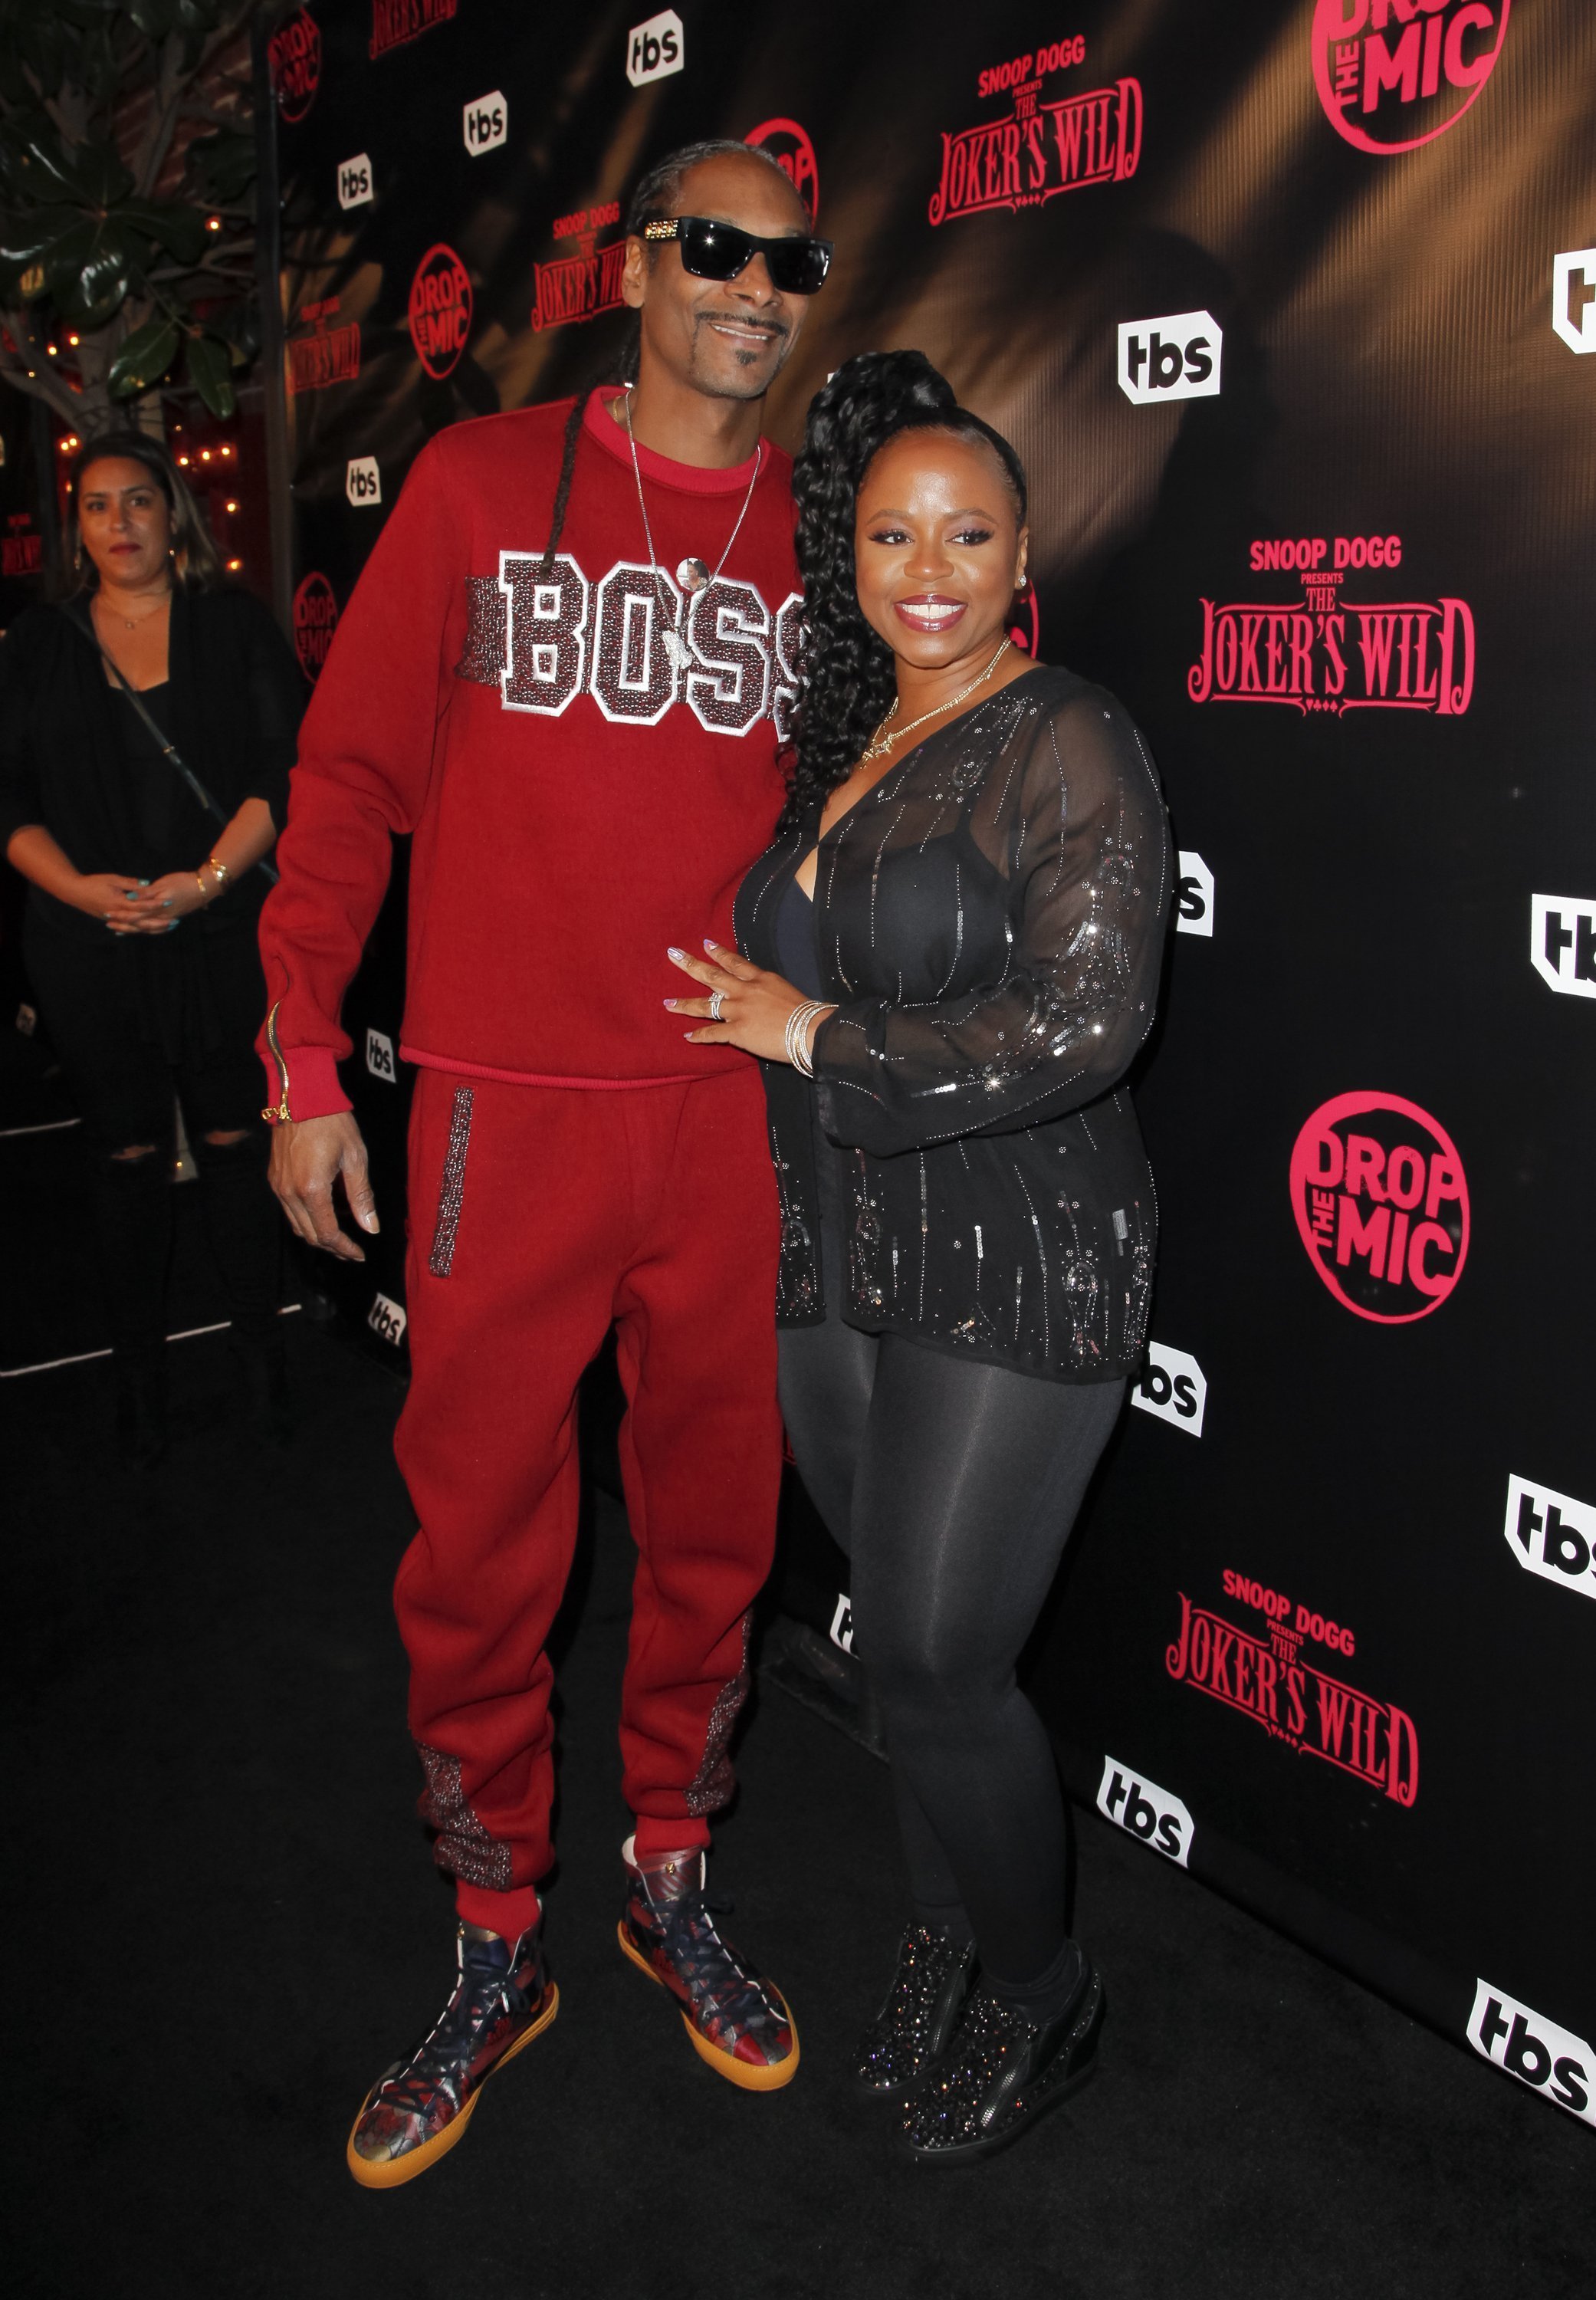 Snoop Dogg and Shante Broadus attend the premiere for TBS's "Drop The Mic" and "The Joker's Wild" on Oct.11, 2017 | Photo: Getty Images